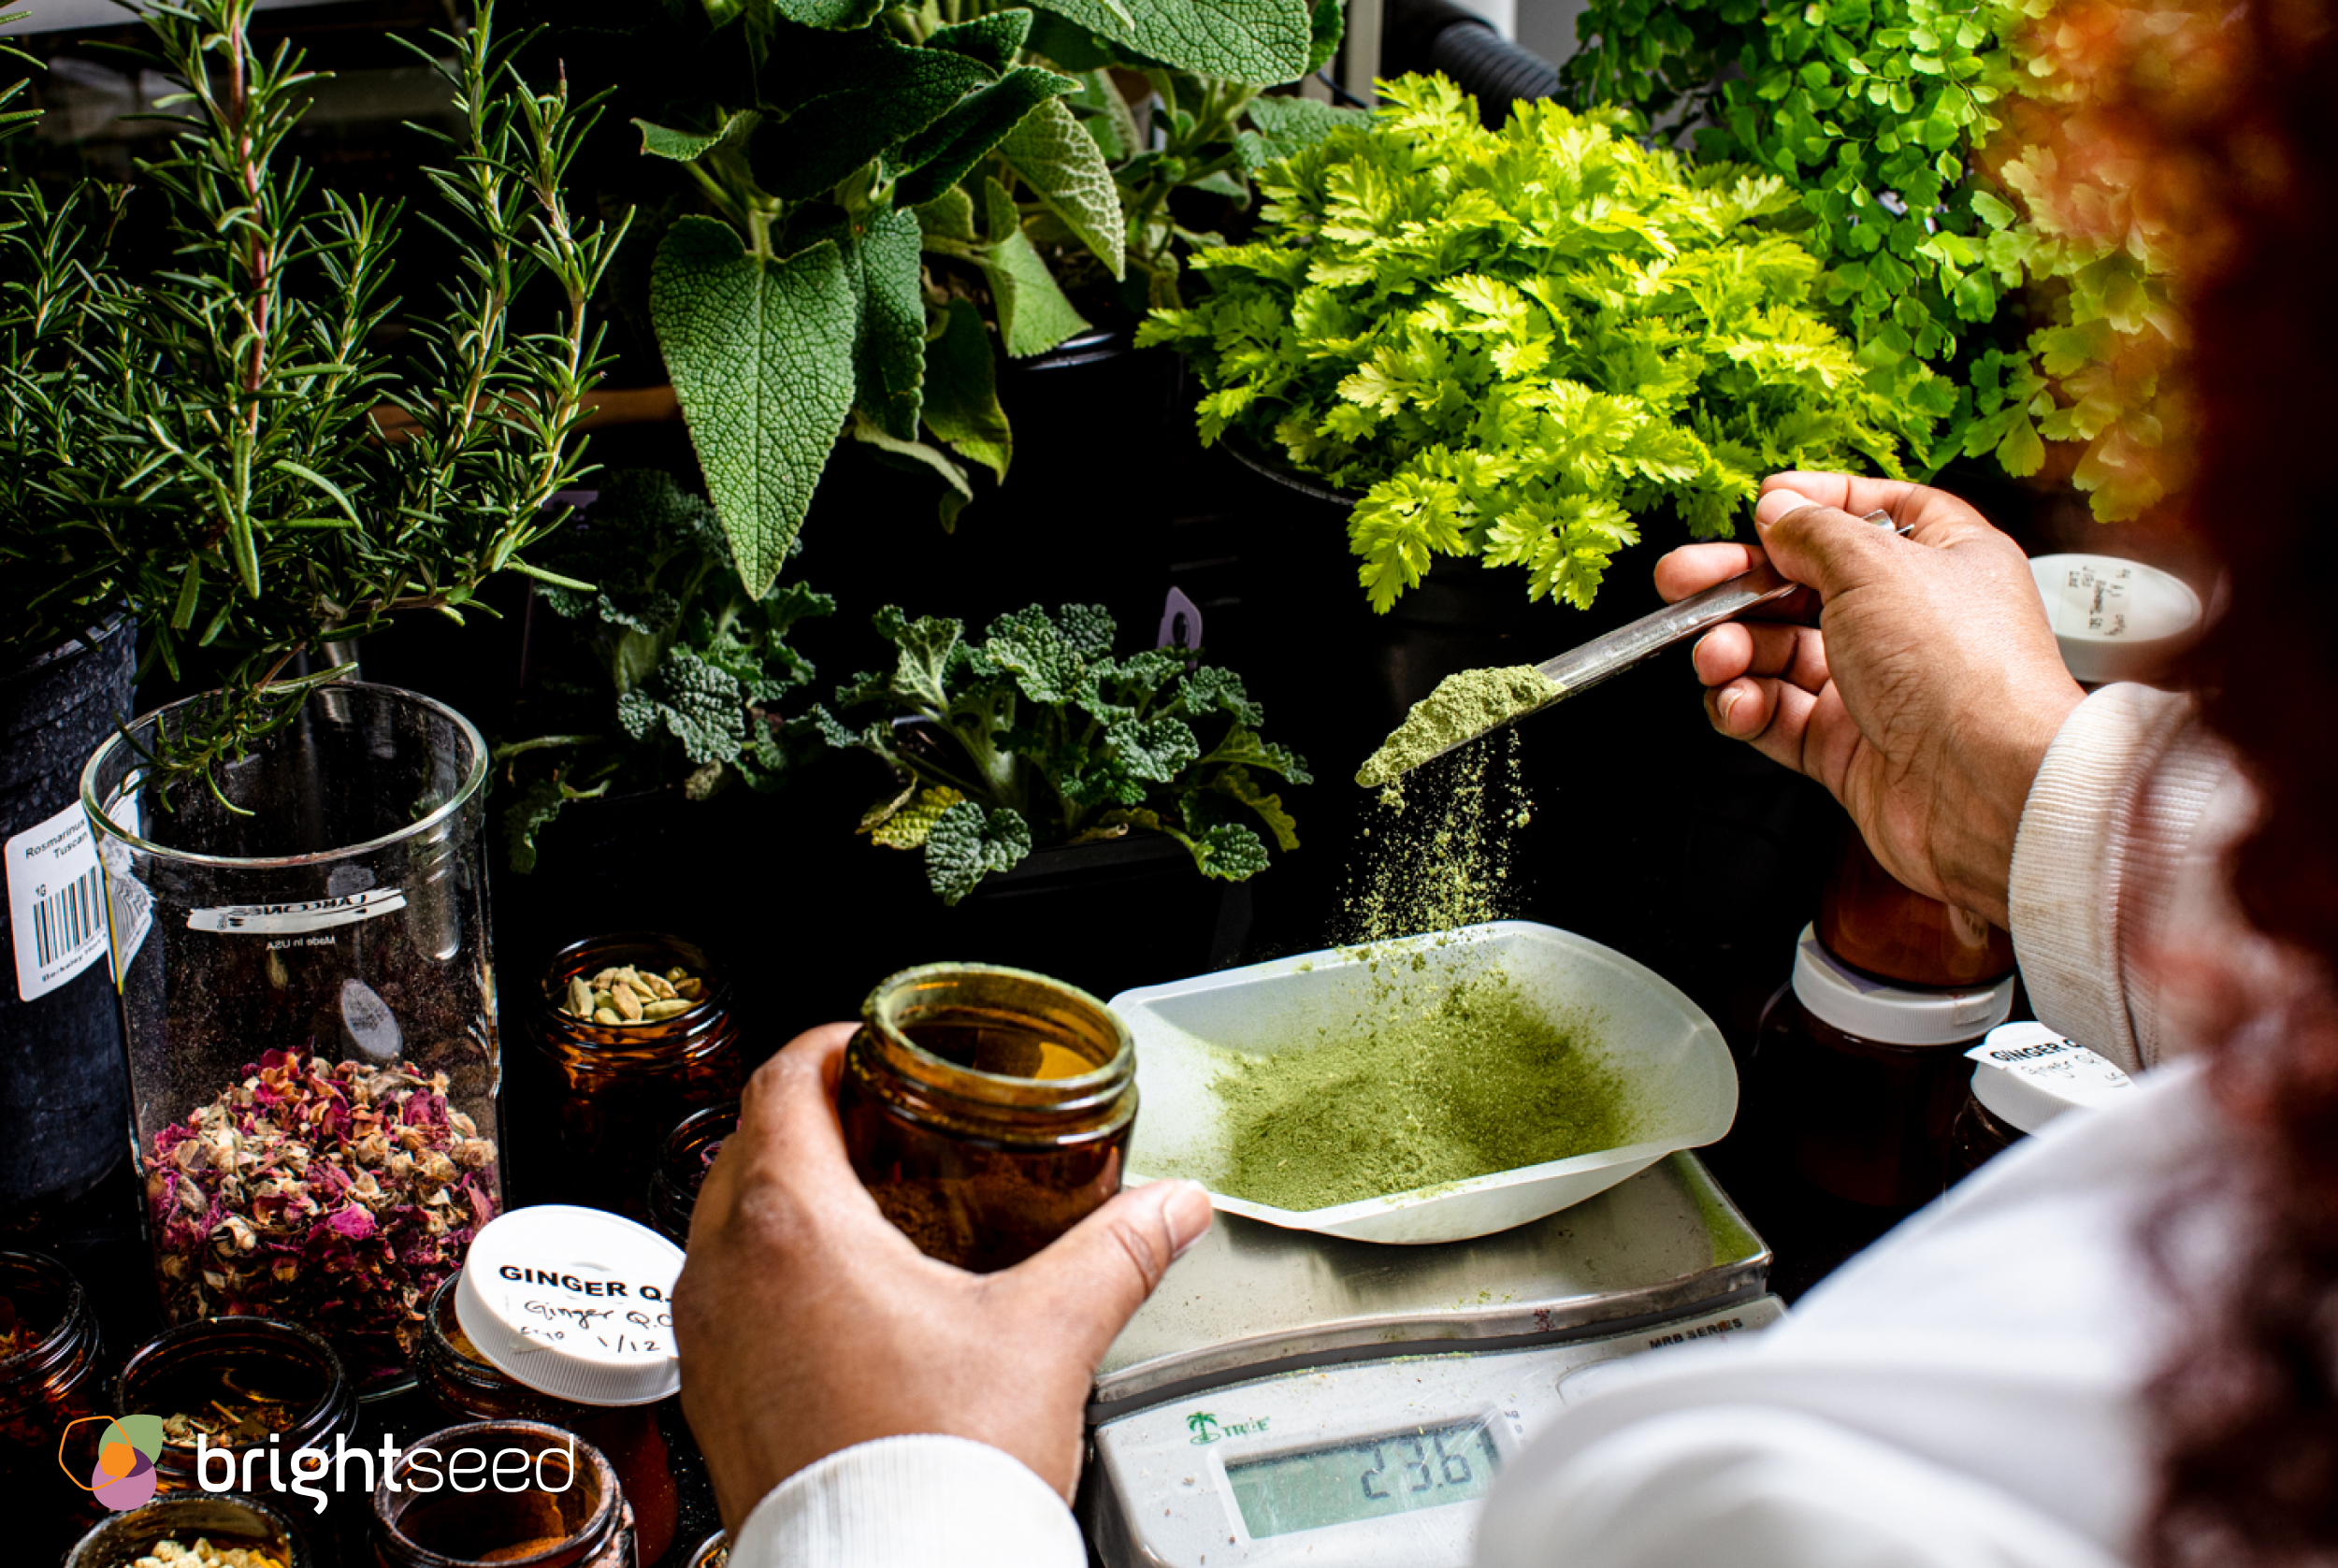 A scientist weighs out a powder in a plant-filled lab.